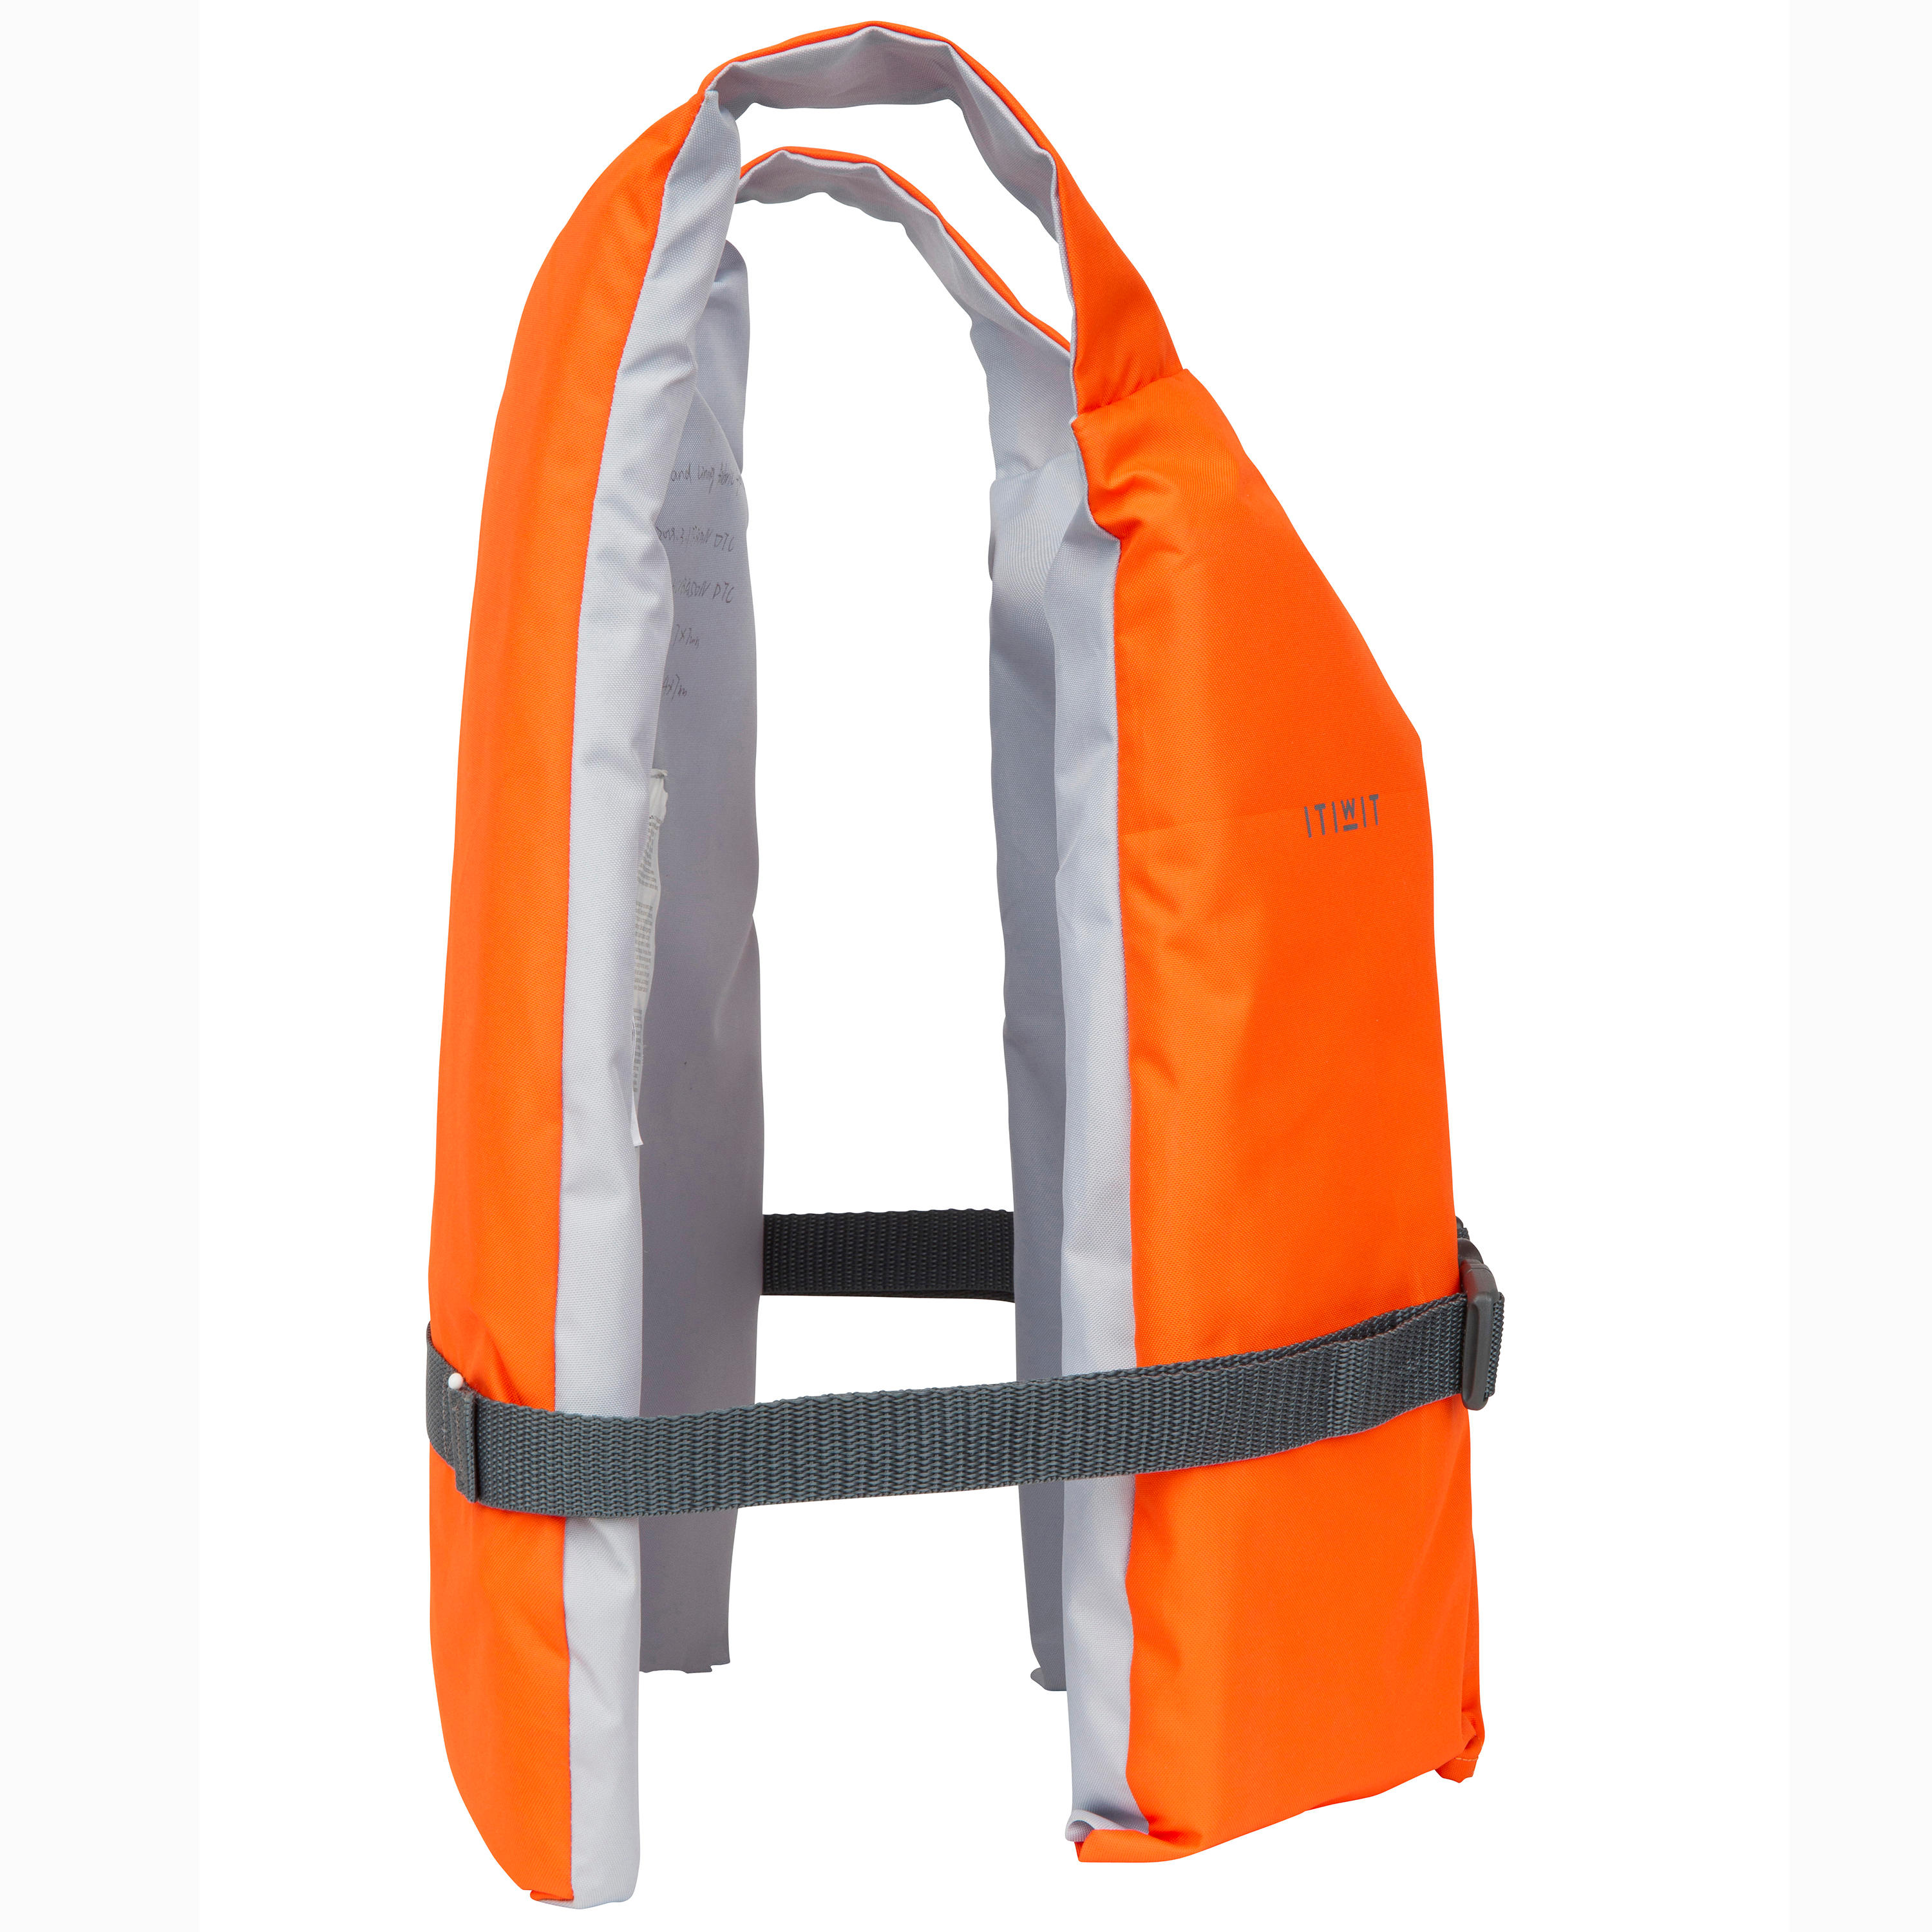 BA 50N Newtons DTC Kayak, Stand Up Paddle or Dinghy Life Vest 3/9